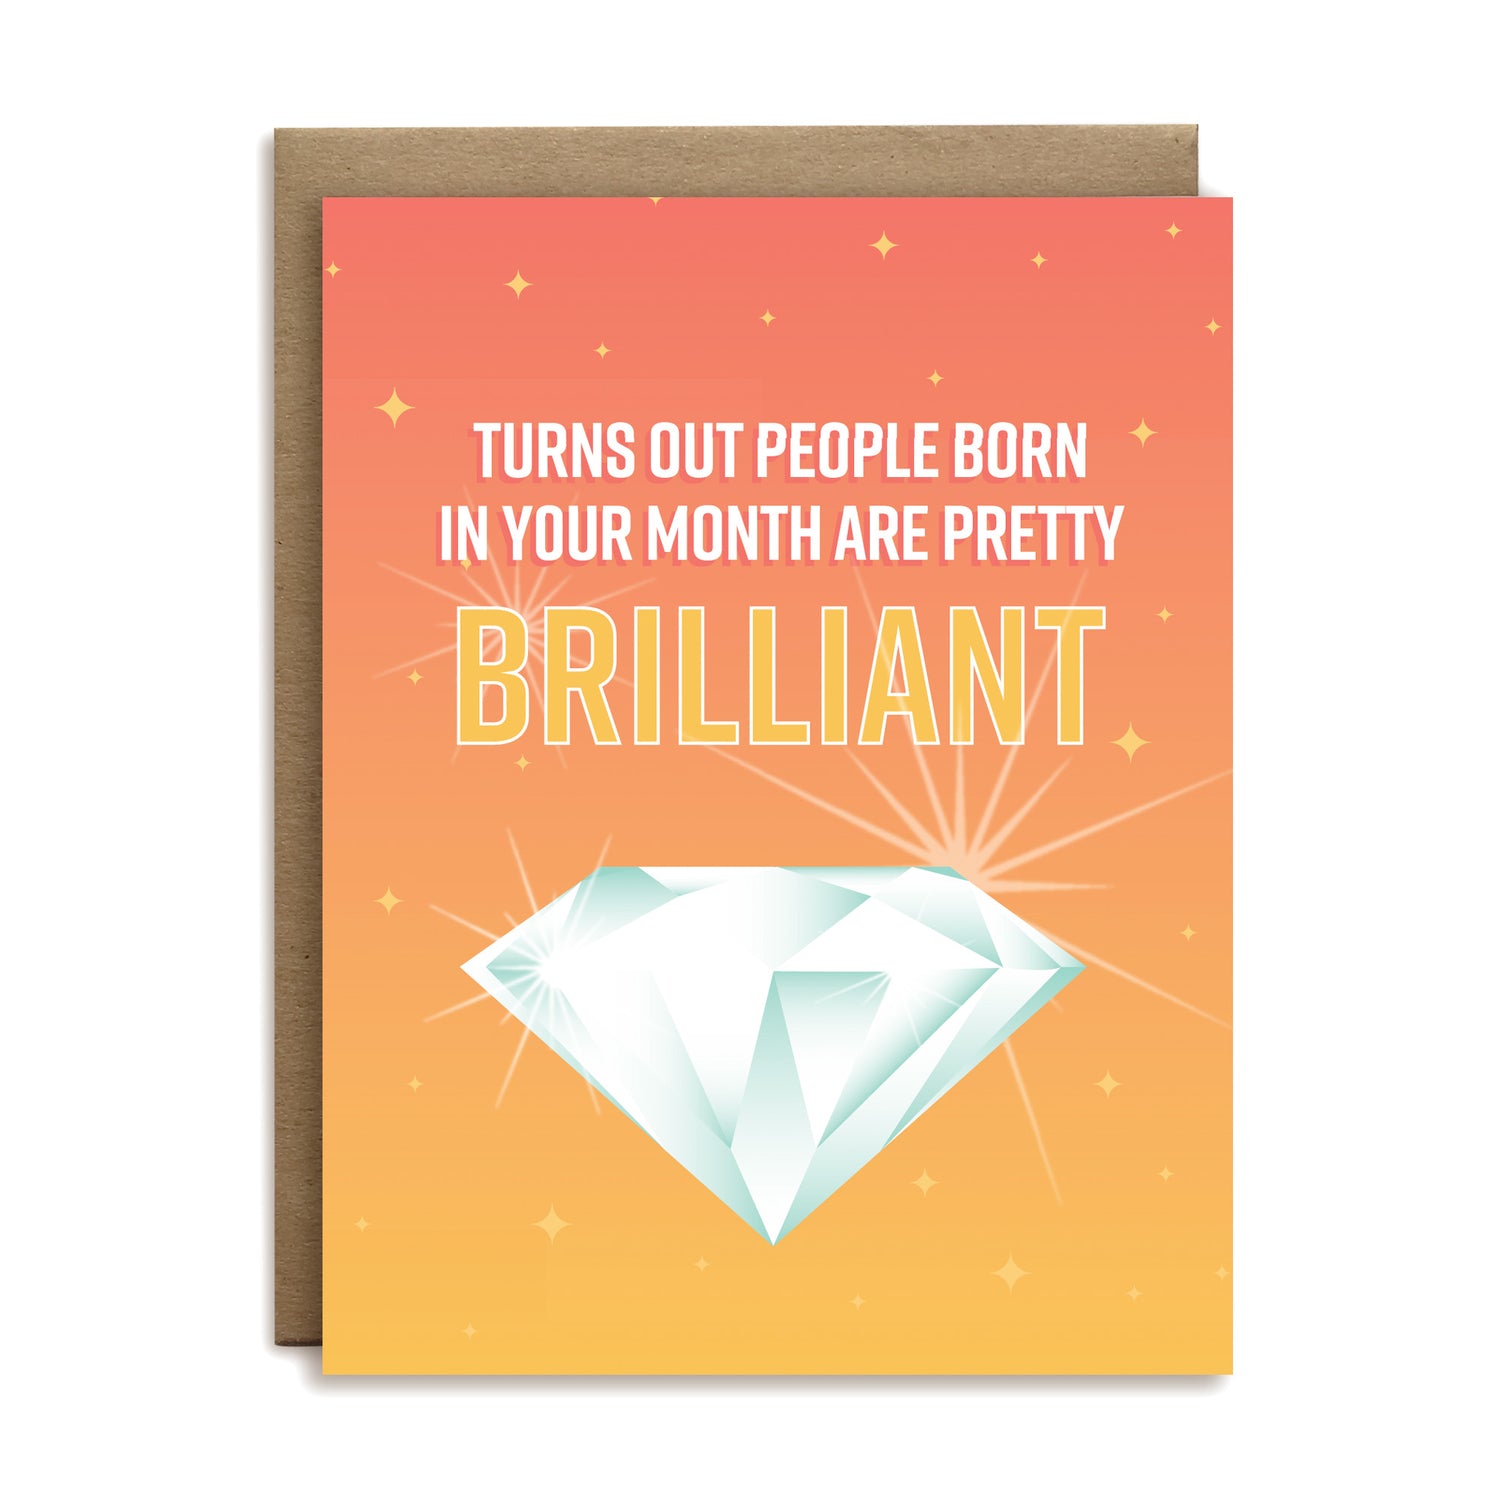 Turns out people born in your month are pretty brilliant birthday greeting card by I’ll Know It When I See It